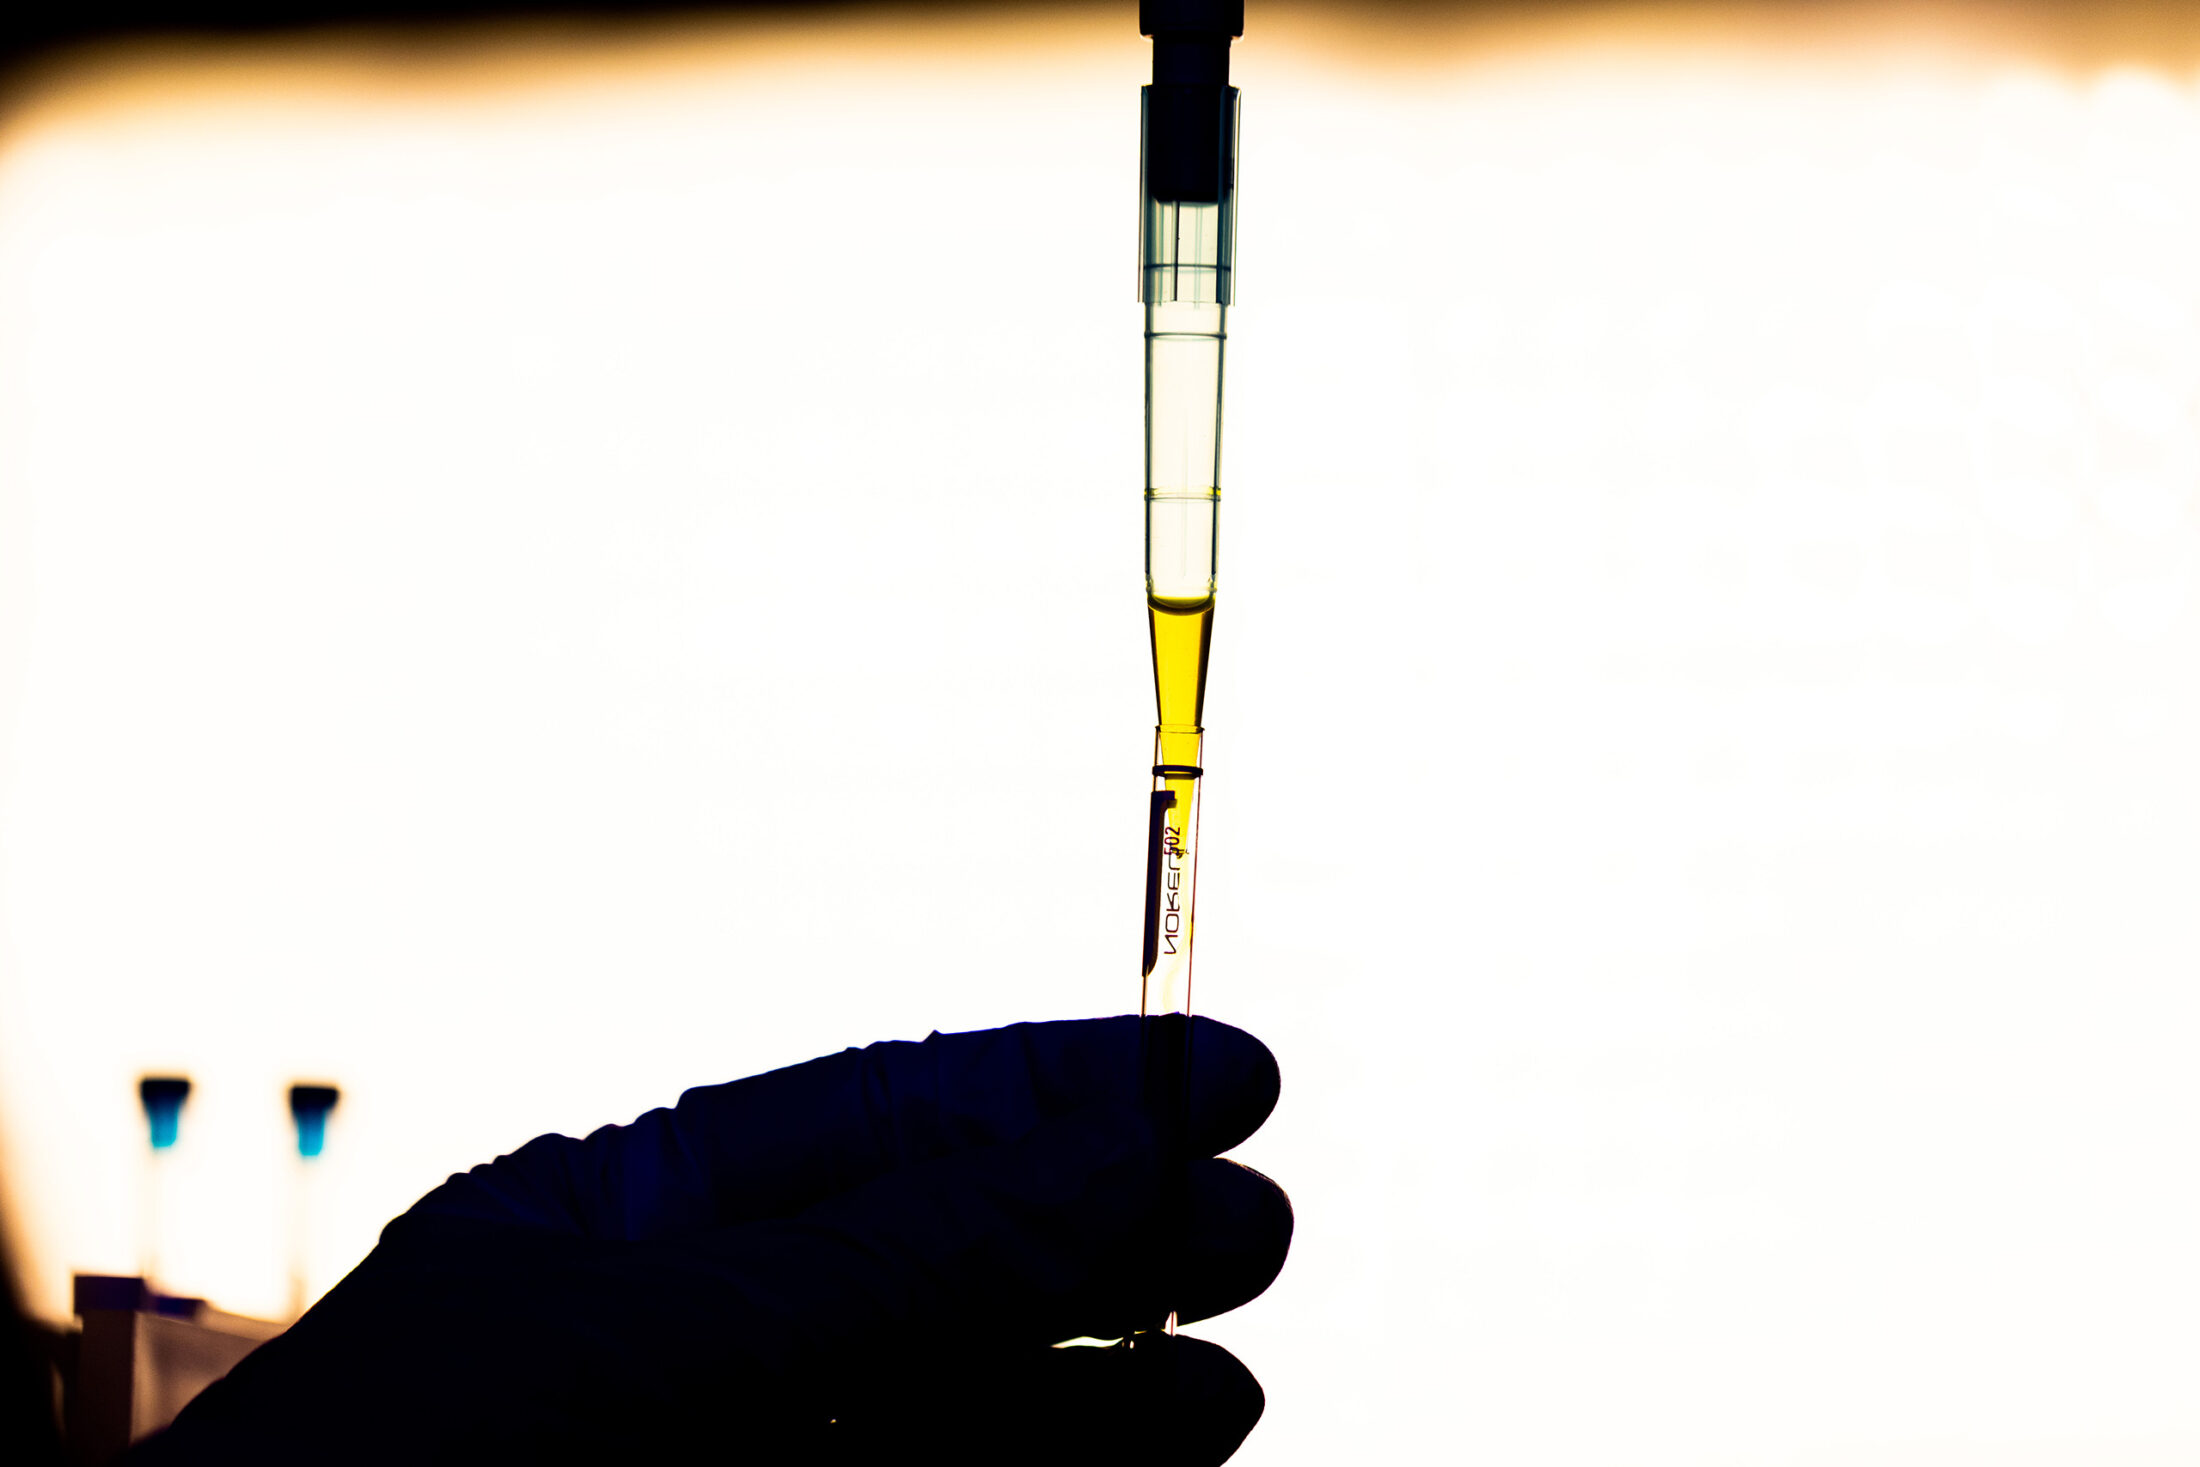 A pipette drops yellow liquid into a container held by a gloved hand in shadow.